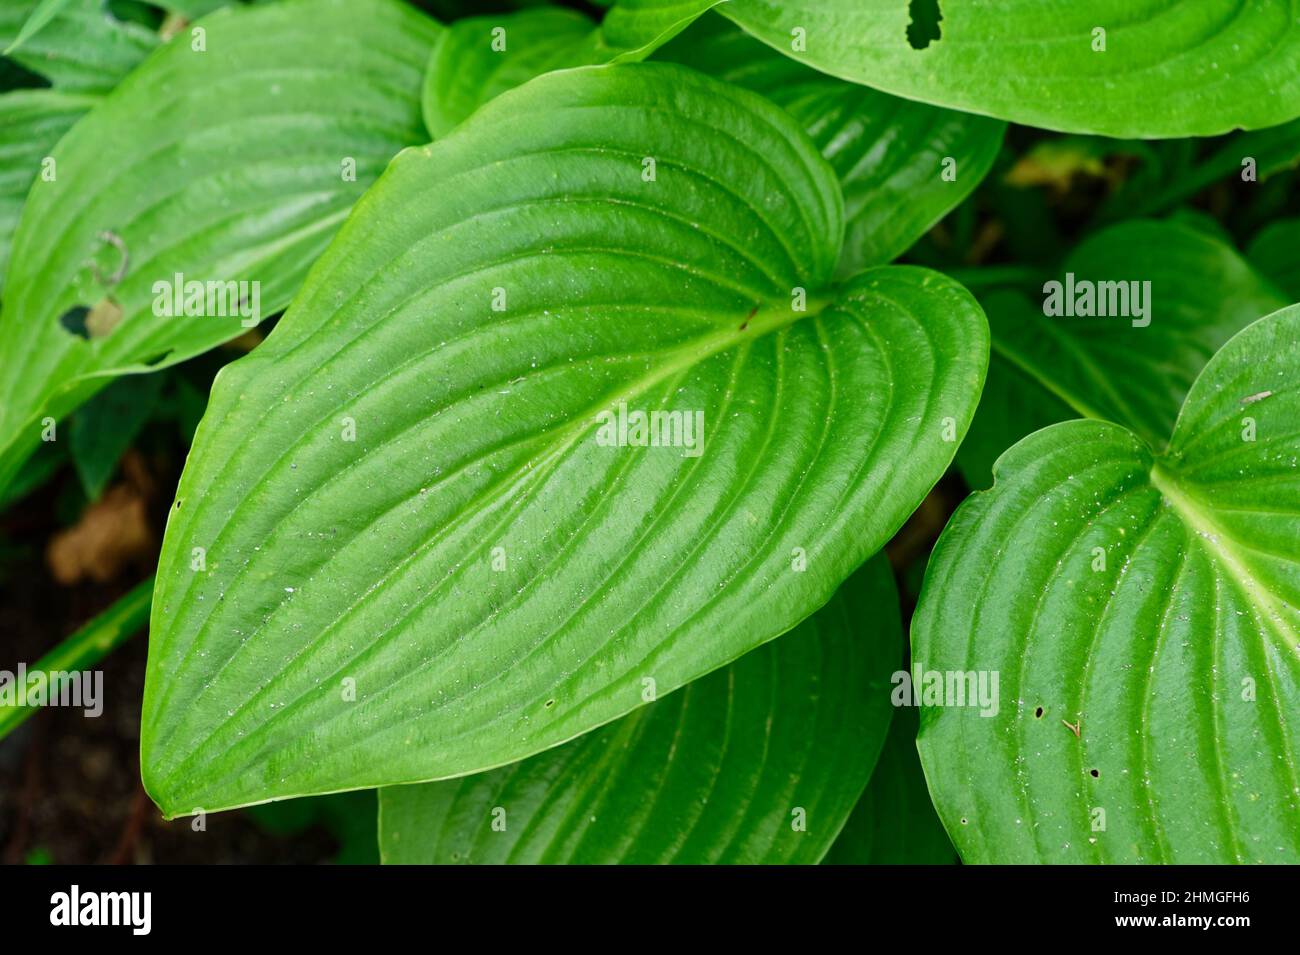 Green hosta leaves with large ribs. There is some sand on some of the leaves. Stock Photo